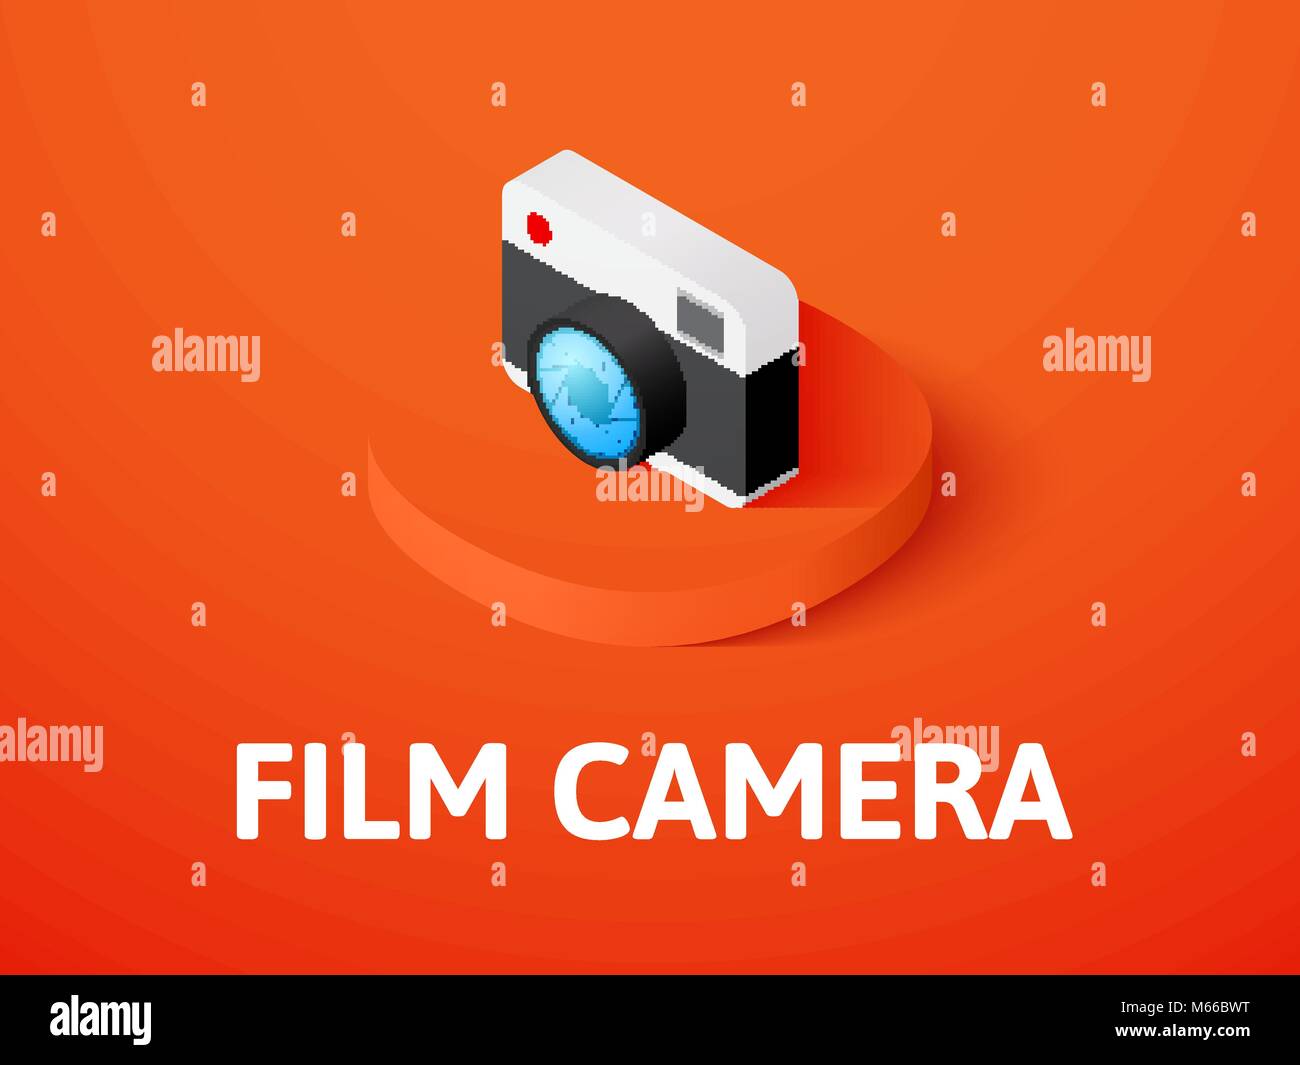 Film camera isometric icon, isolated on color background Stock Vector